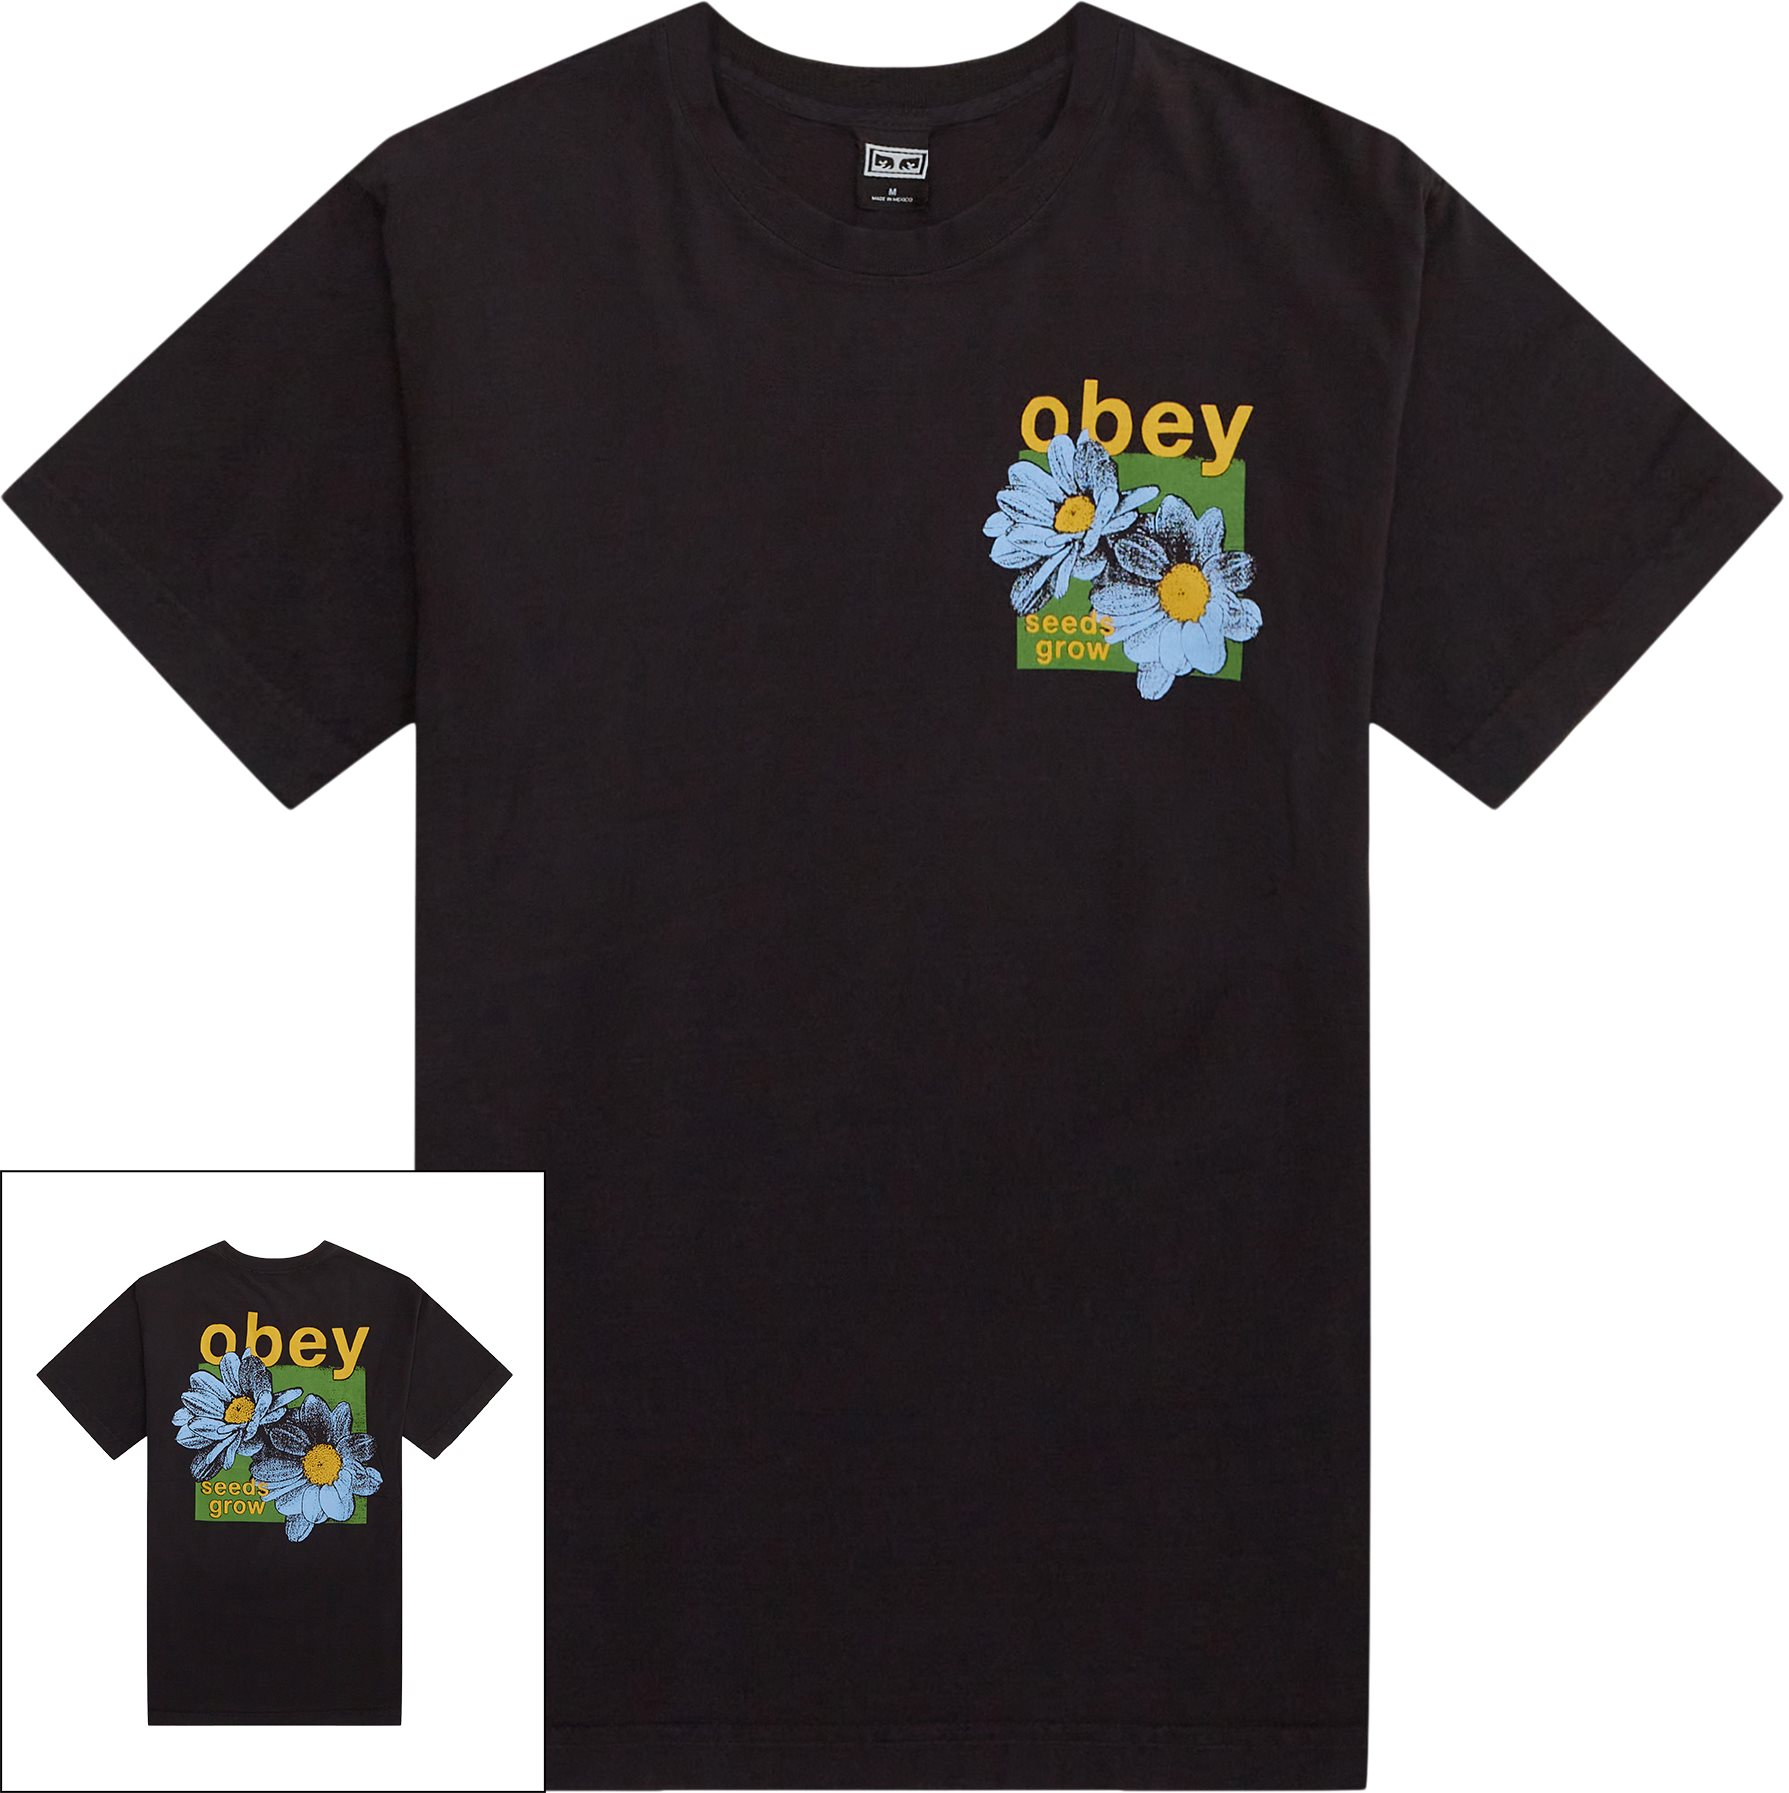 Obey T-shirts OBEY SEEDS GROW 166913705 Sort